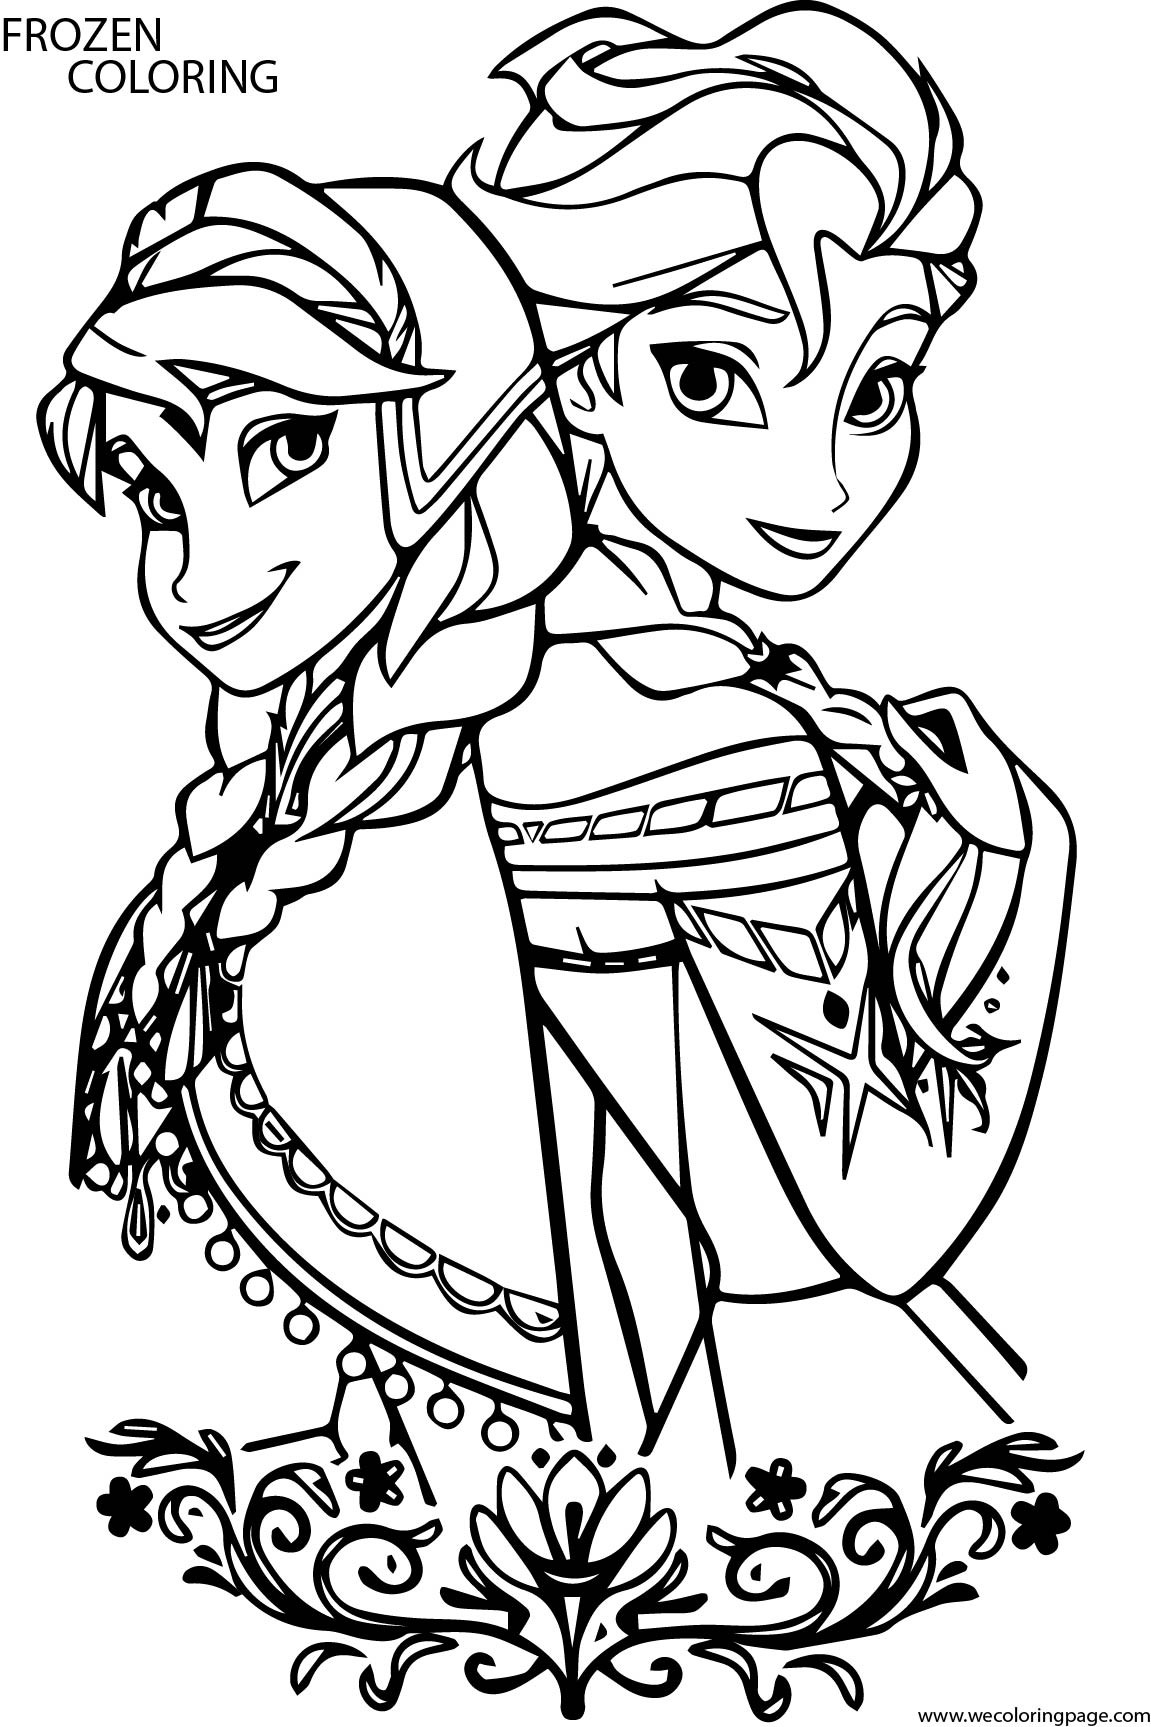 Coloring Book For Kids Frozen
 WeColoringPage Frozen